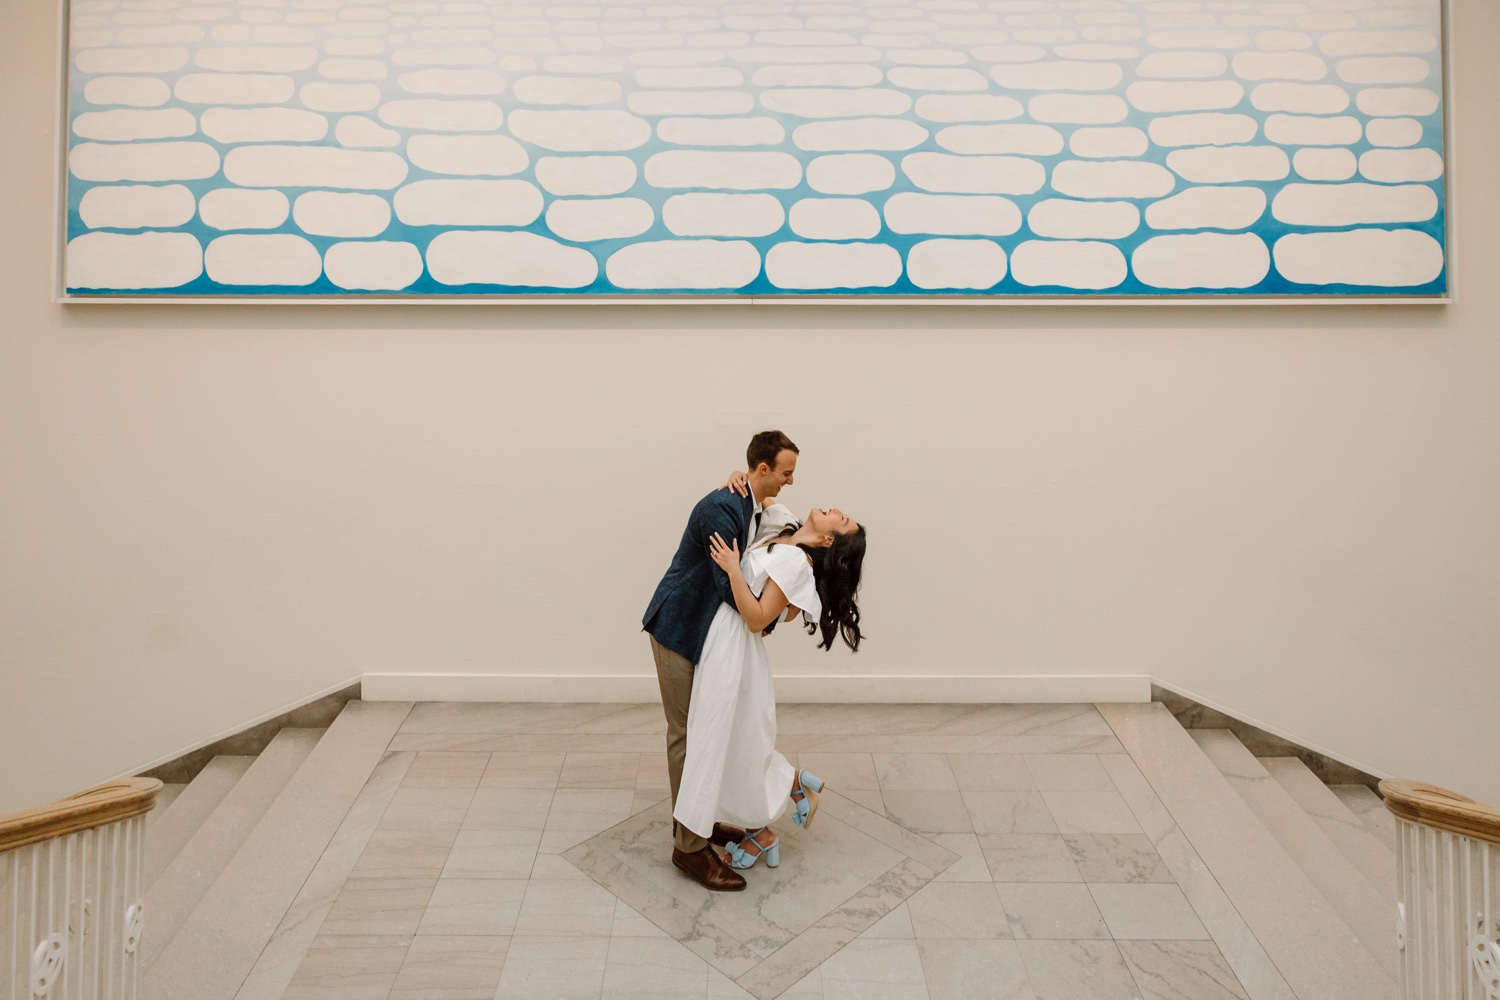 Art Institute of Chicago Engagement Pictures | Chicago Wedding Photographer